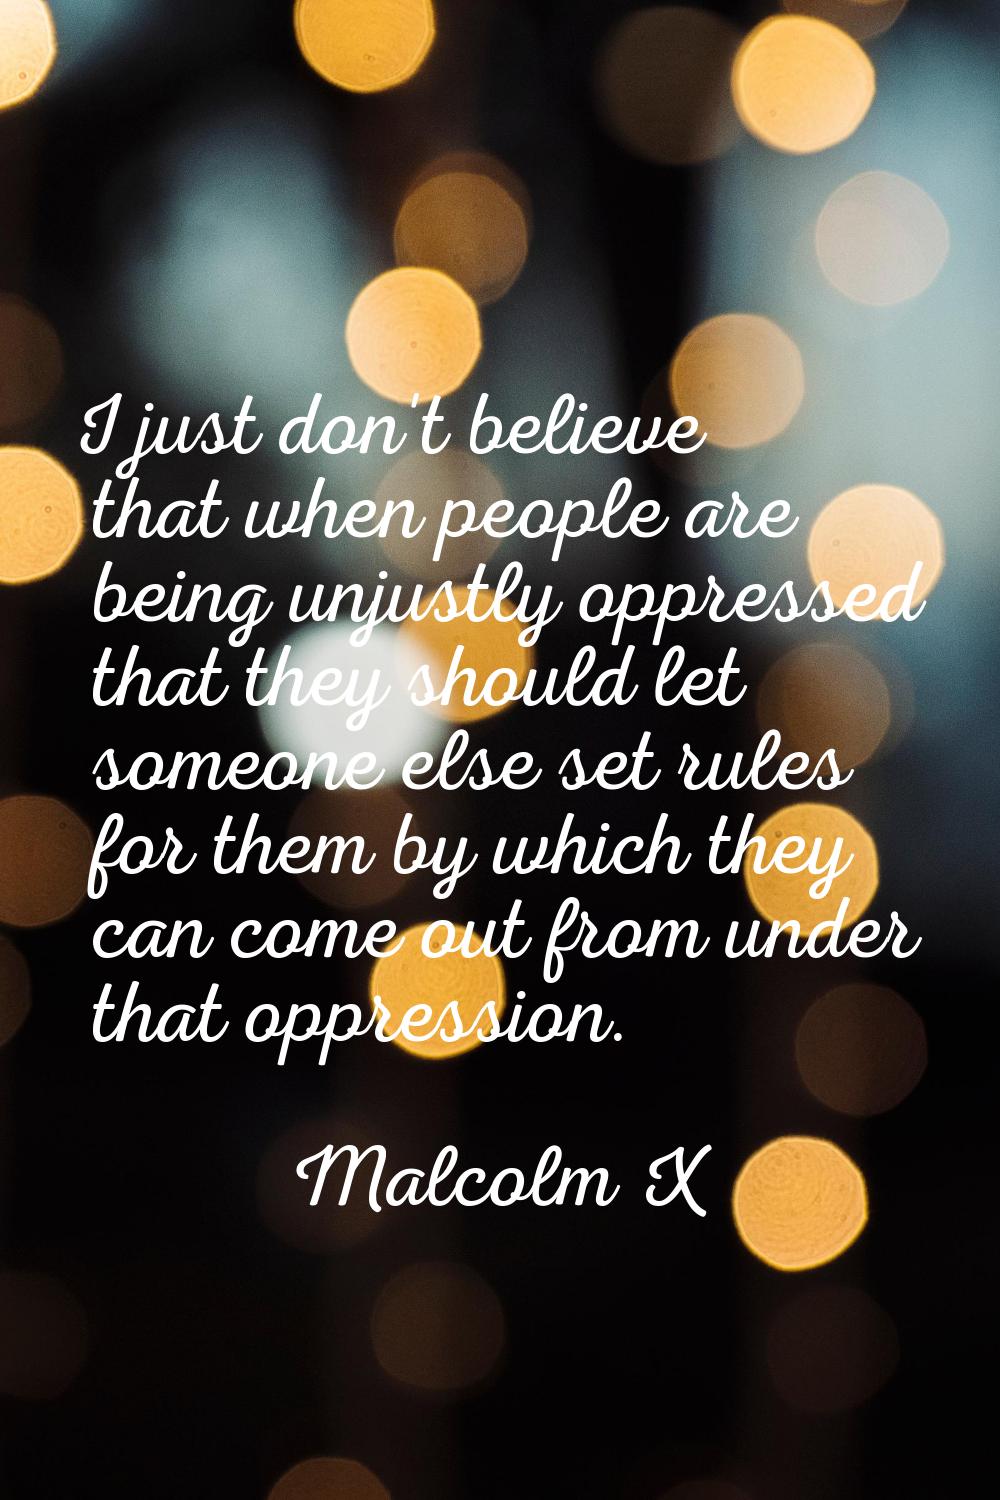 I just don't believe that when people are being unjustly oppressed that they should let someone els